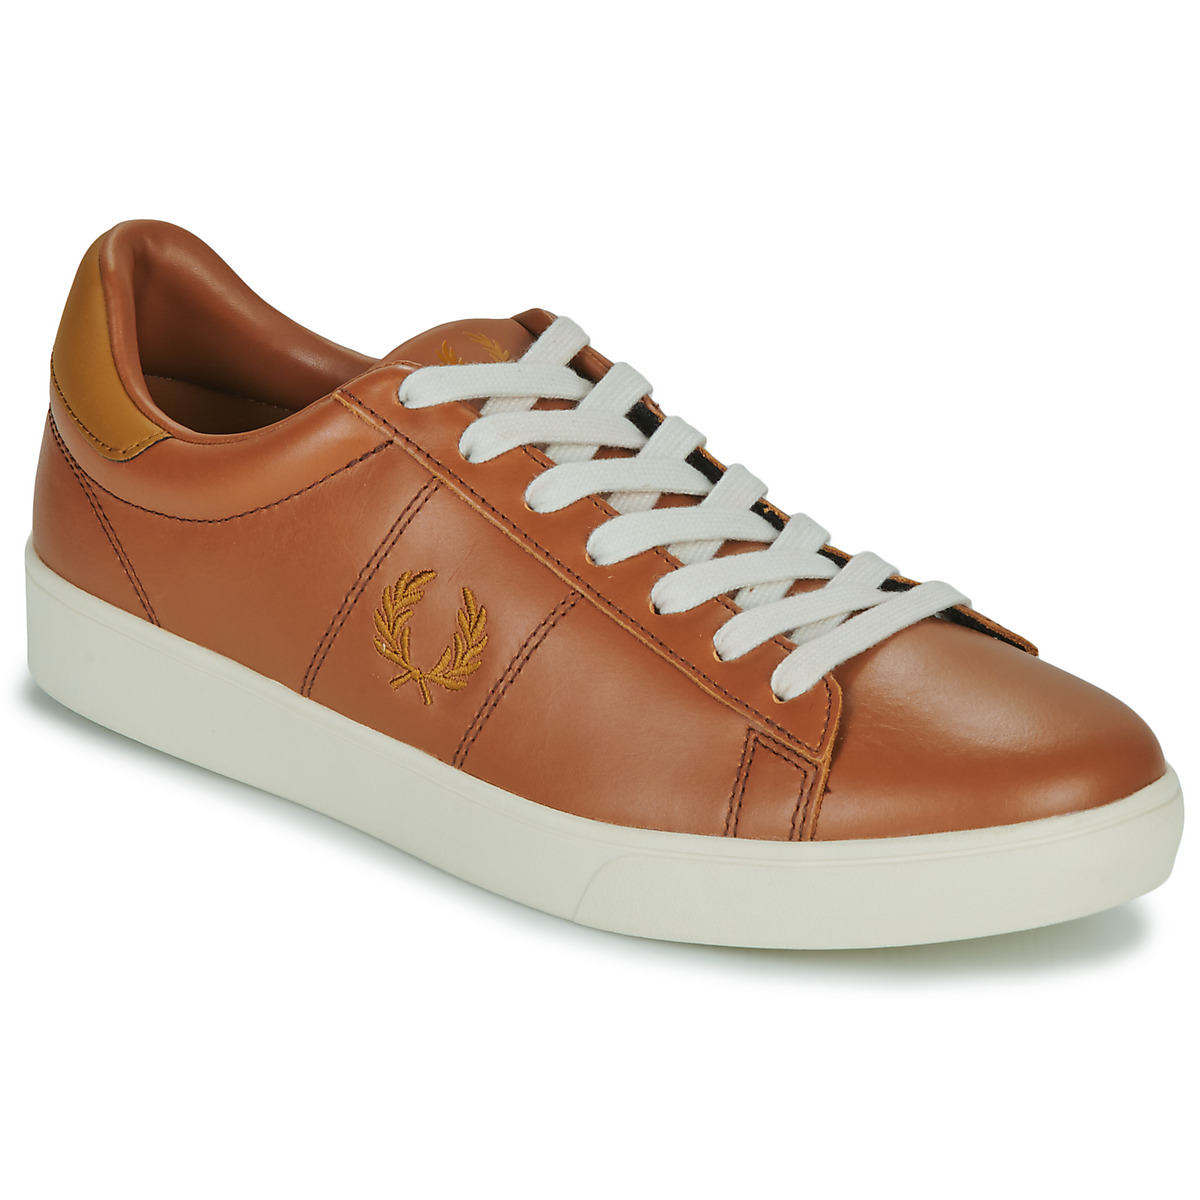 Fred Perry Marron SPENCER LEATHER vUw2S4qJ